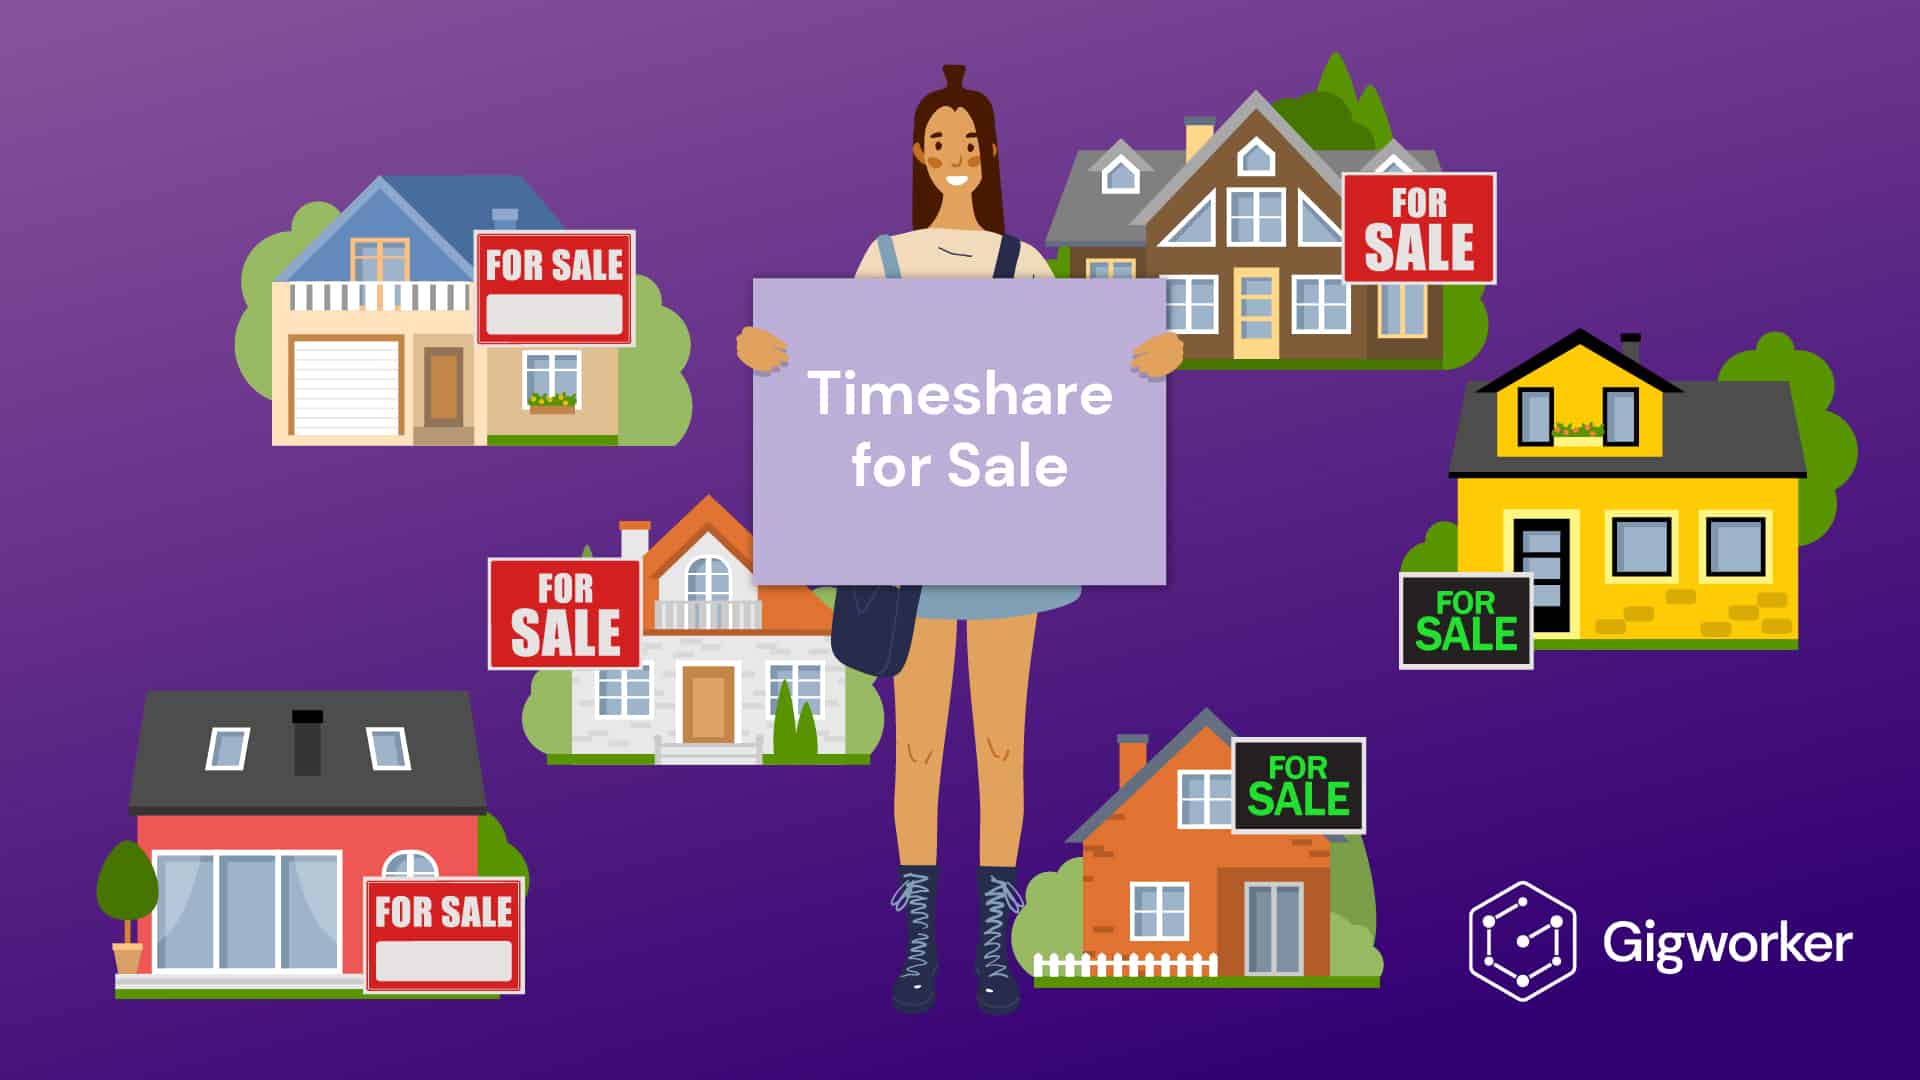 vector graphic showing an illustration of how to sell a timeshare